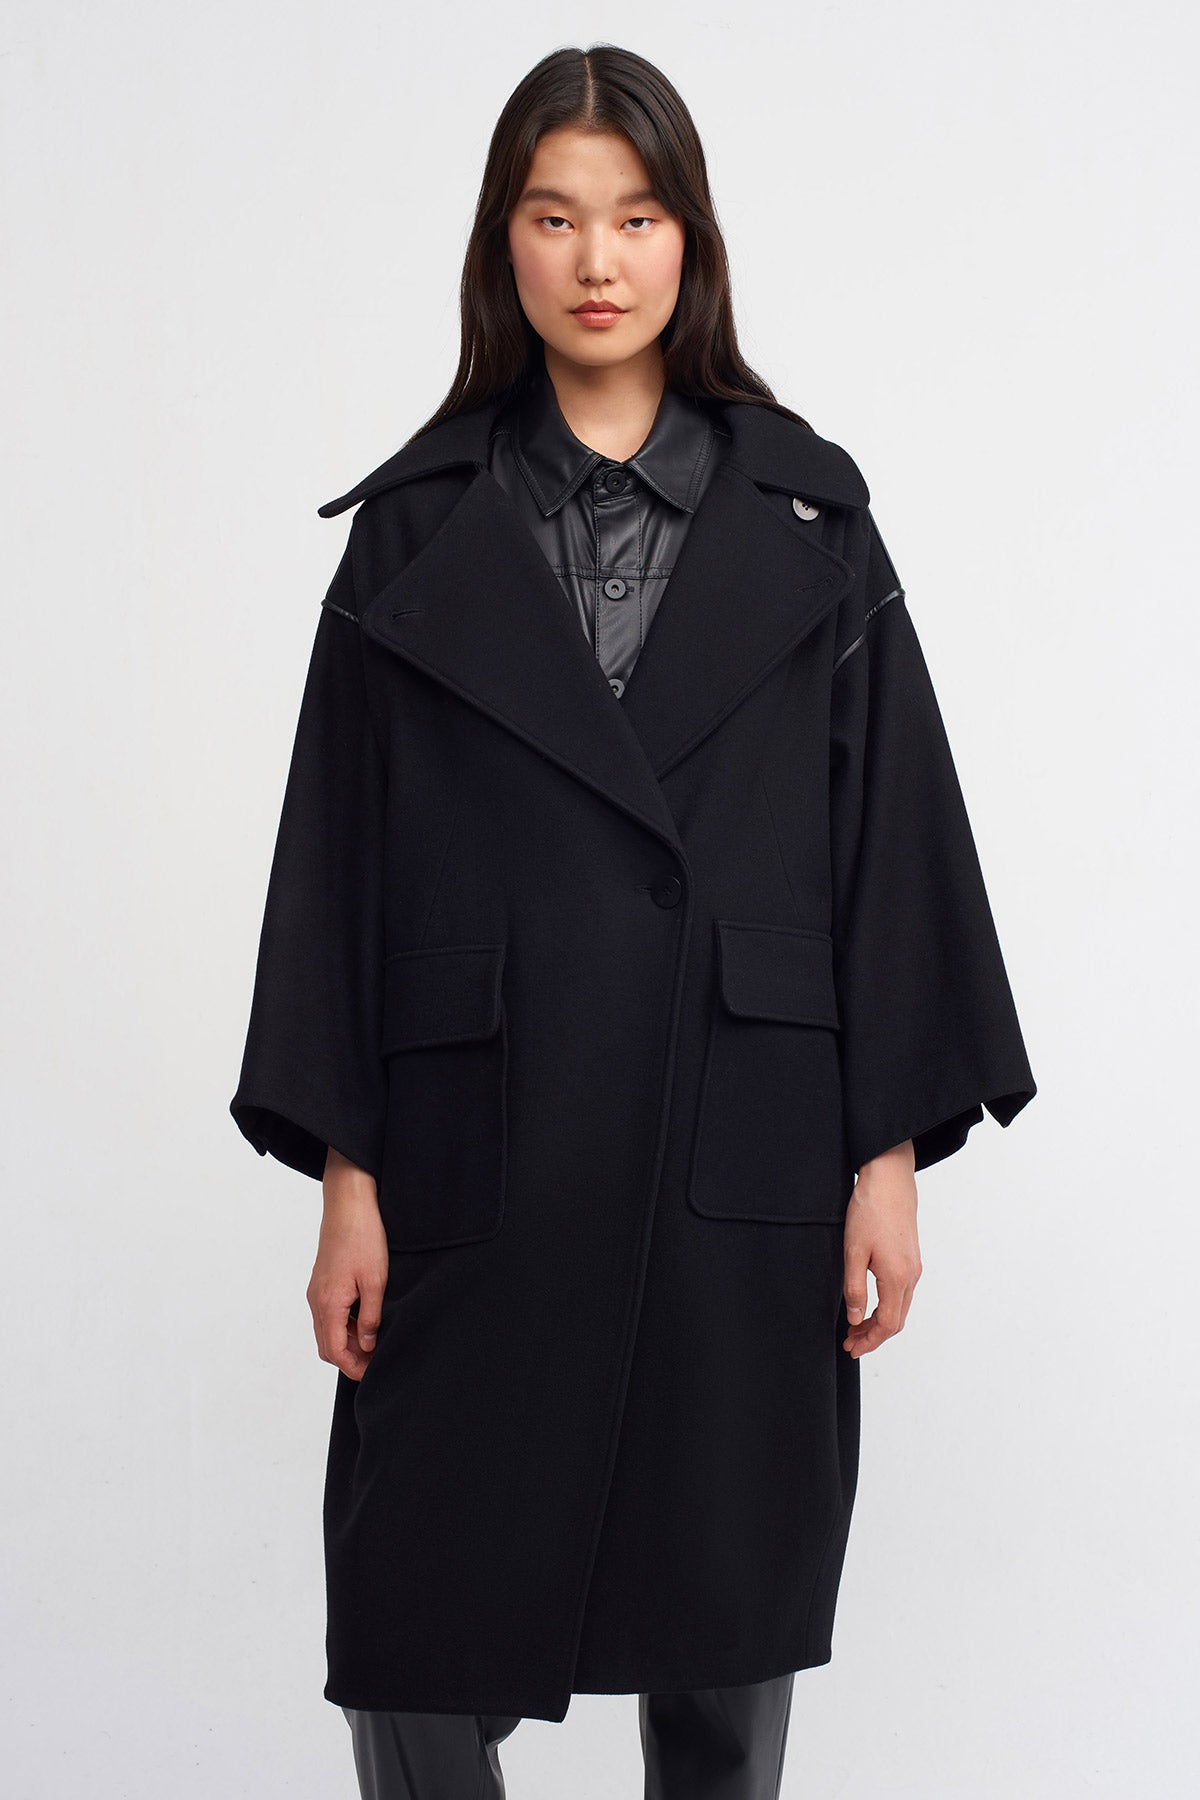 Black Oversized Coat with Leather Trim Detail-K237017016